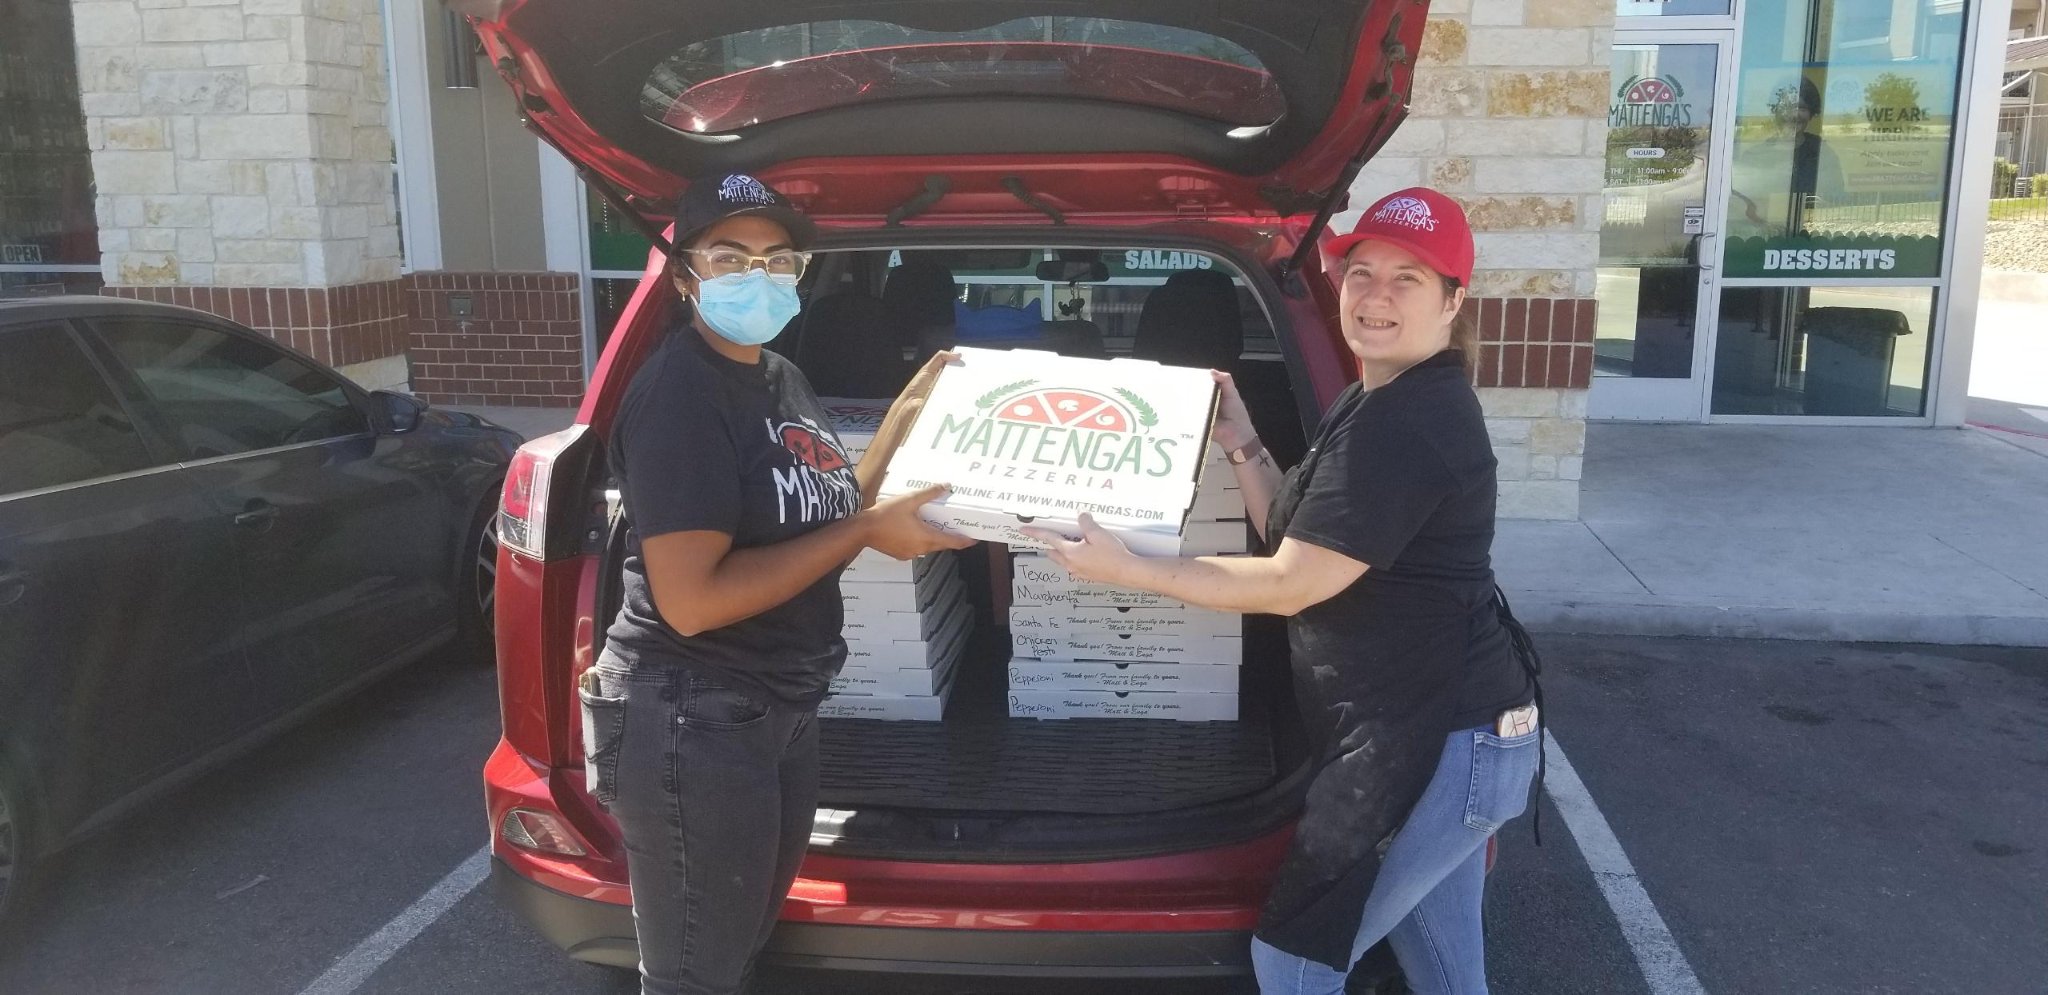 Two female employees of Mattenga's Pizzeria delivering pizza to Lewis Elementary.